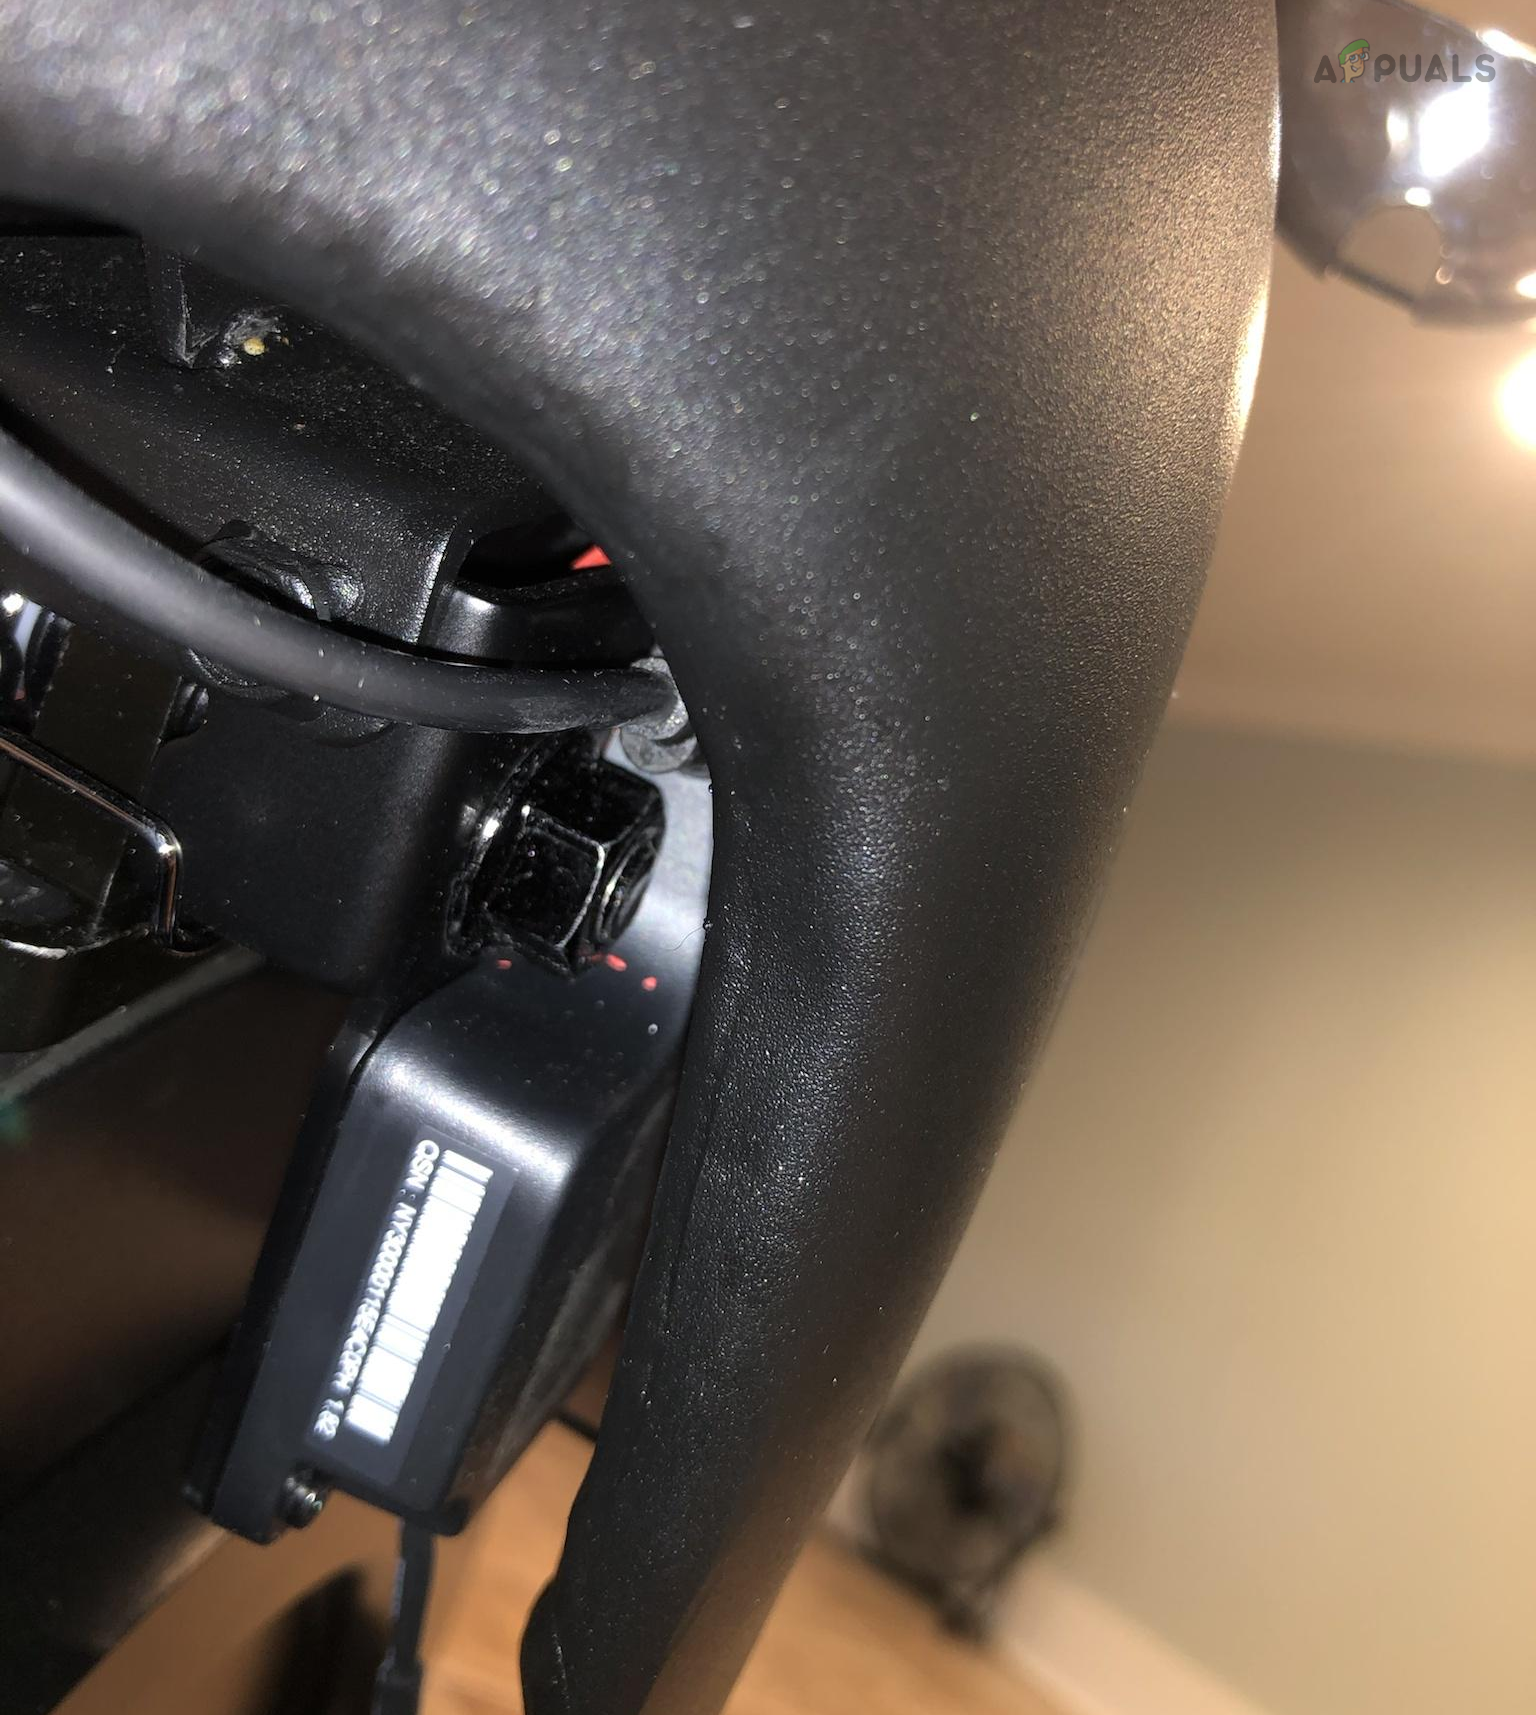 Reconnect the Cable on the Bike's Right Side